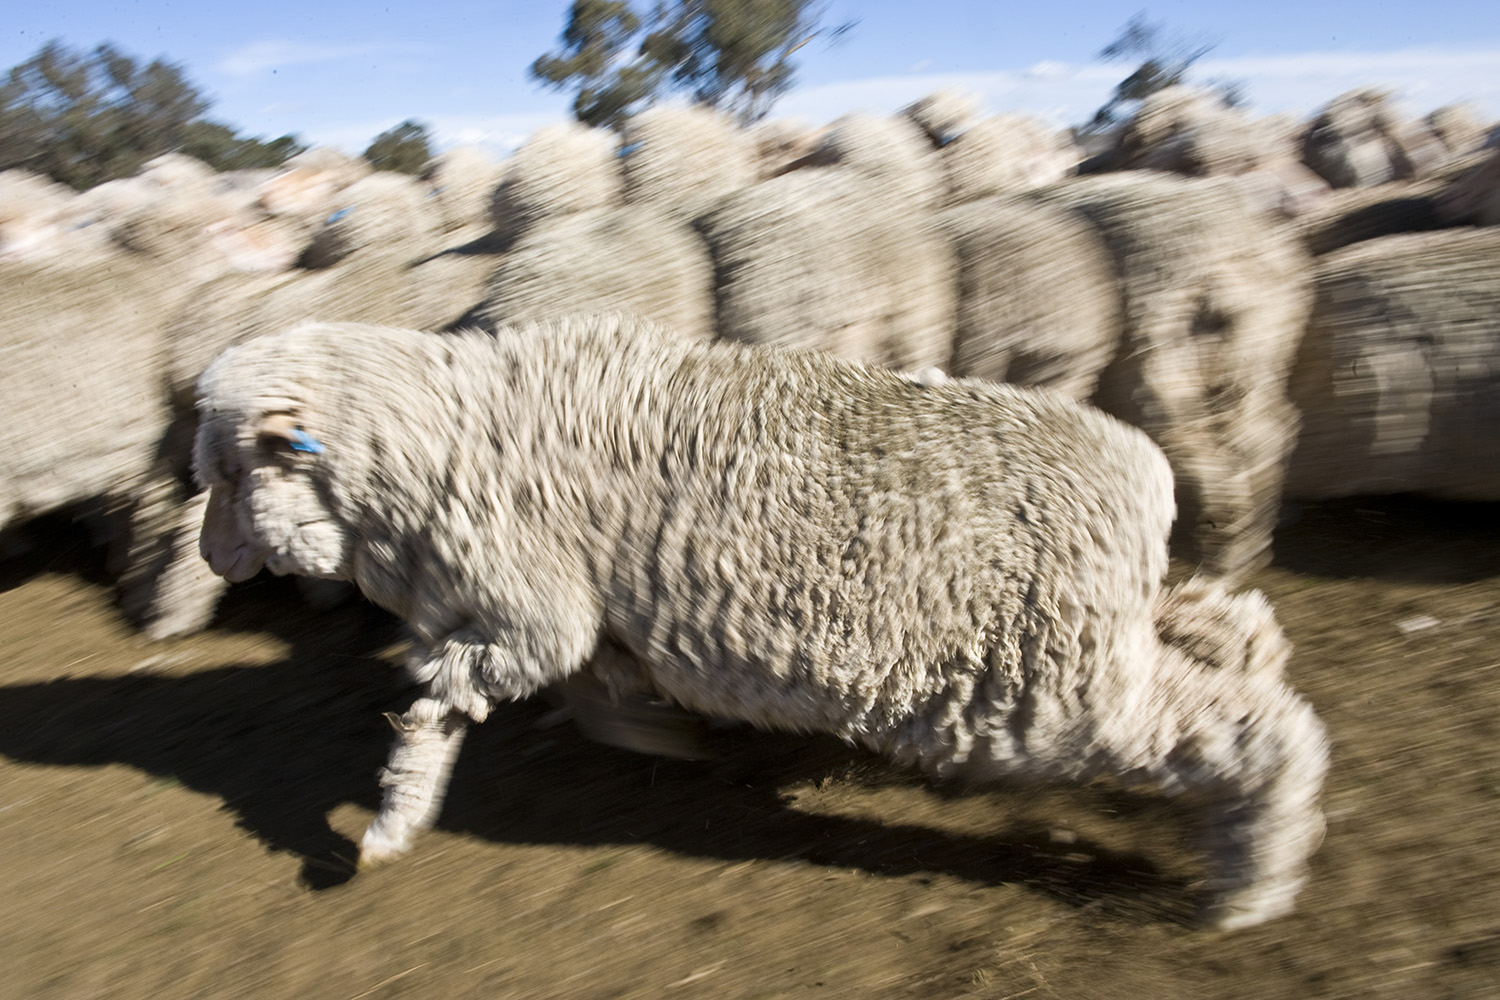 image of AARONTAIT COPYRIGHTED 2014 386 RURAL PHOTOGRAPHER FARM LIFE AGRICULTURE WOOL BEEF STOCKMAN MUSTER CATTLE FARM AUSTRALIAN  SHEEP RAM